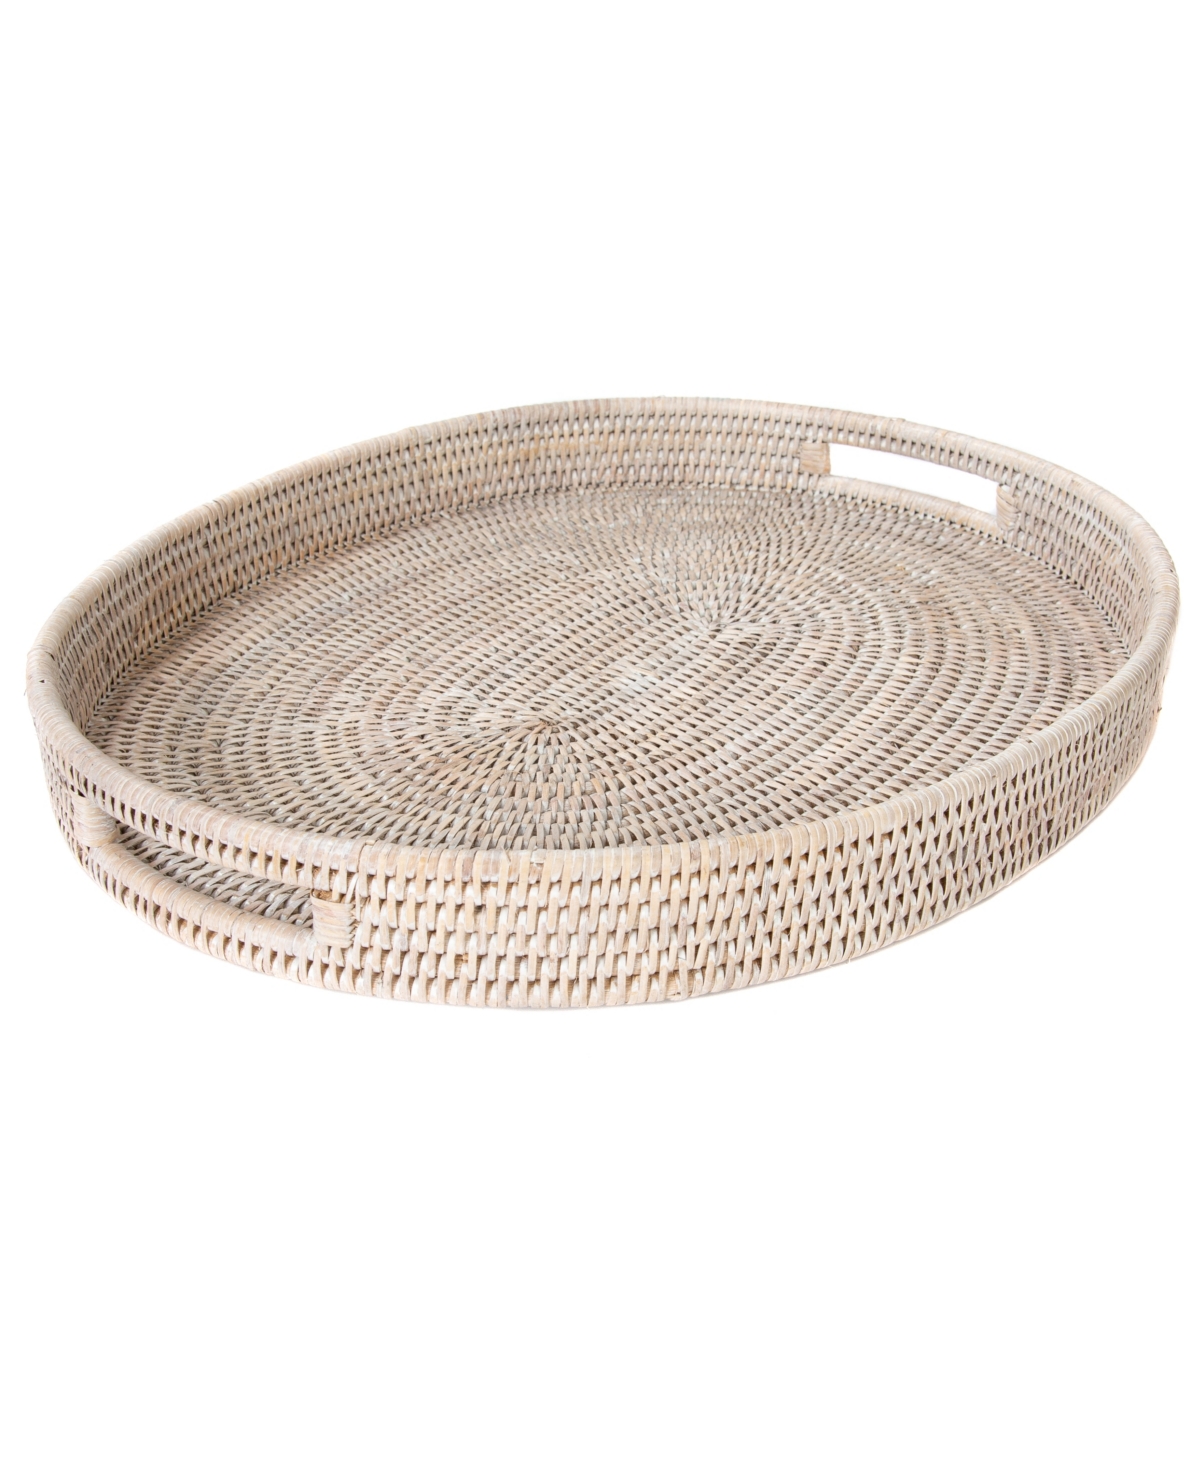 Artifacts Trading Company Artifacts Rattan Oval Tray With Cutout Handles In Off-white